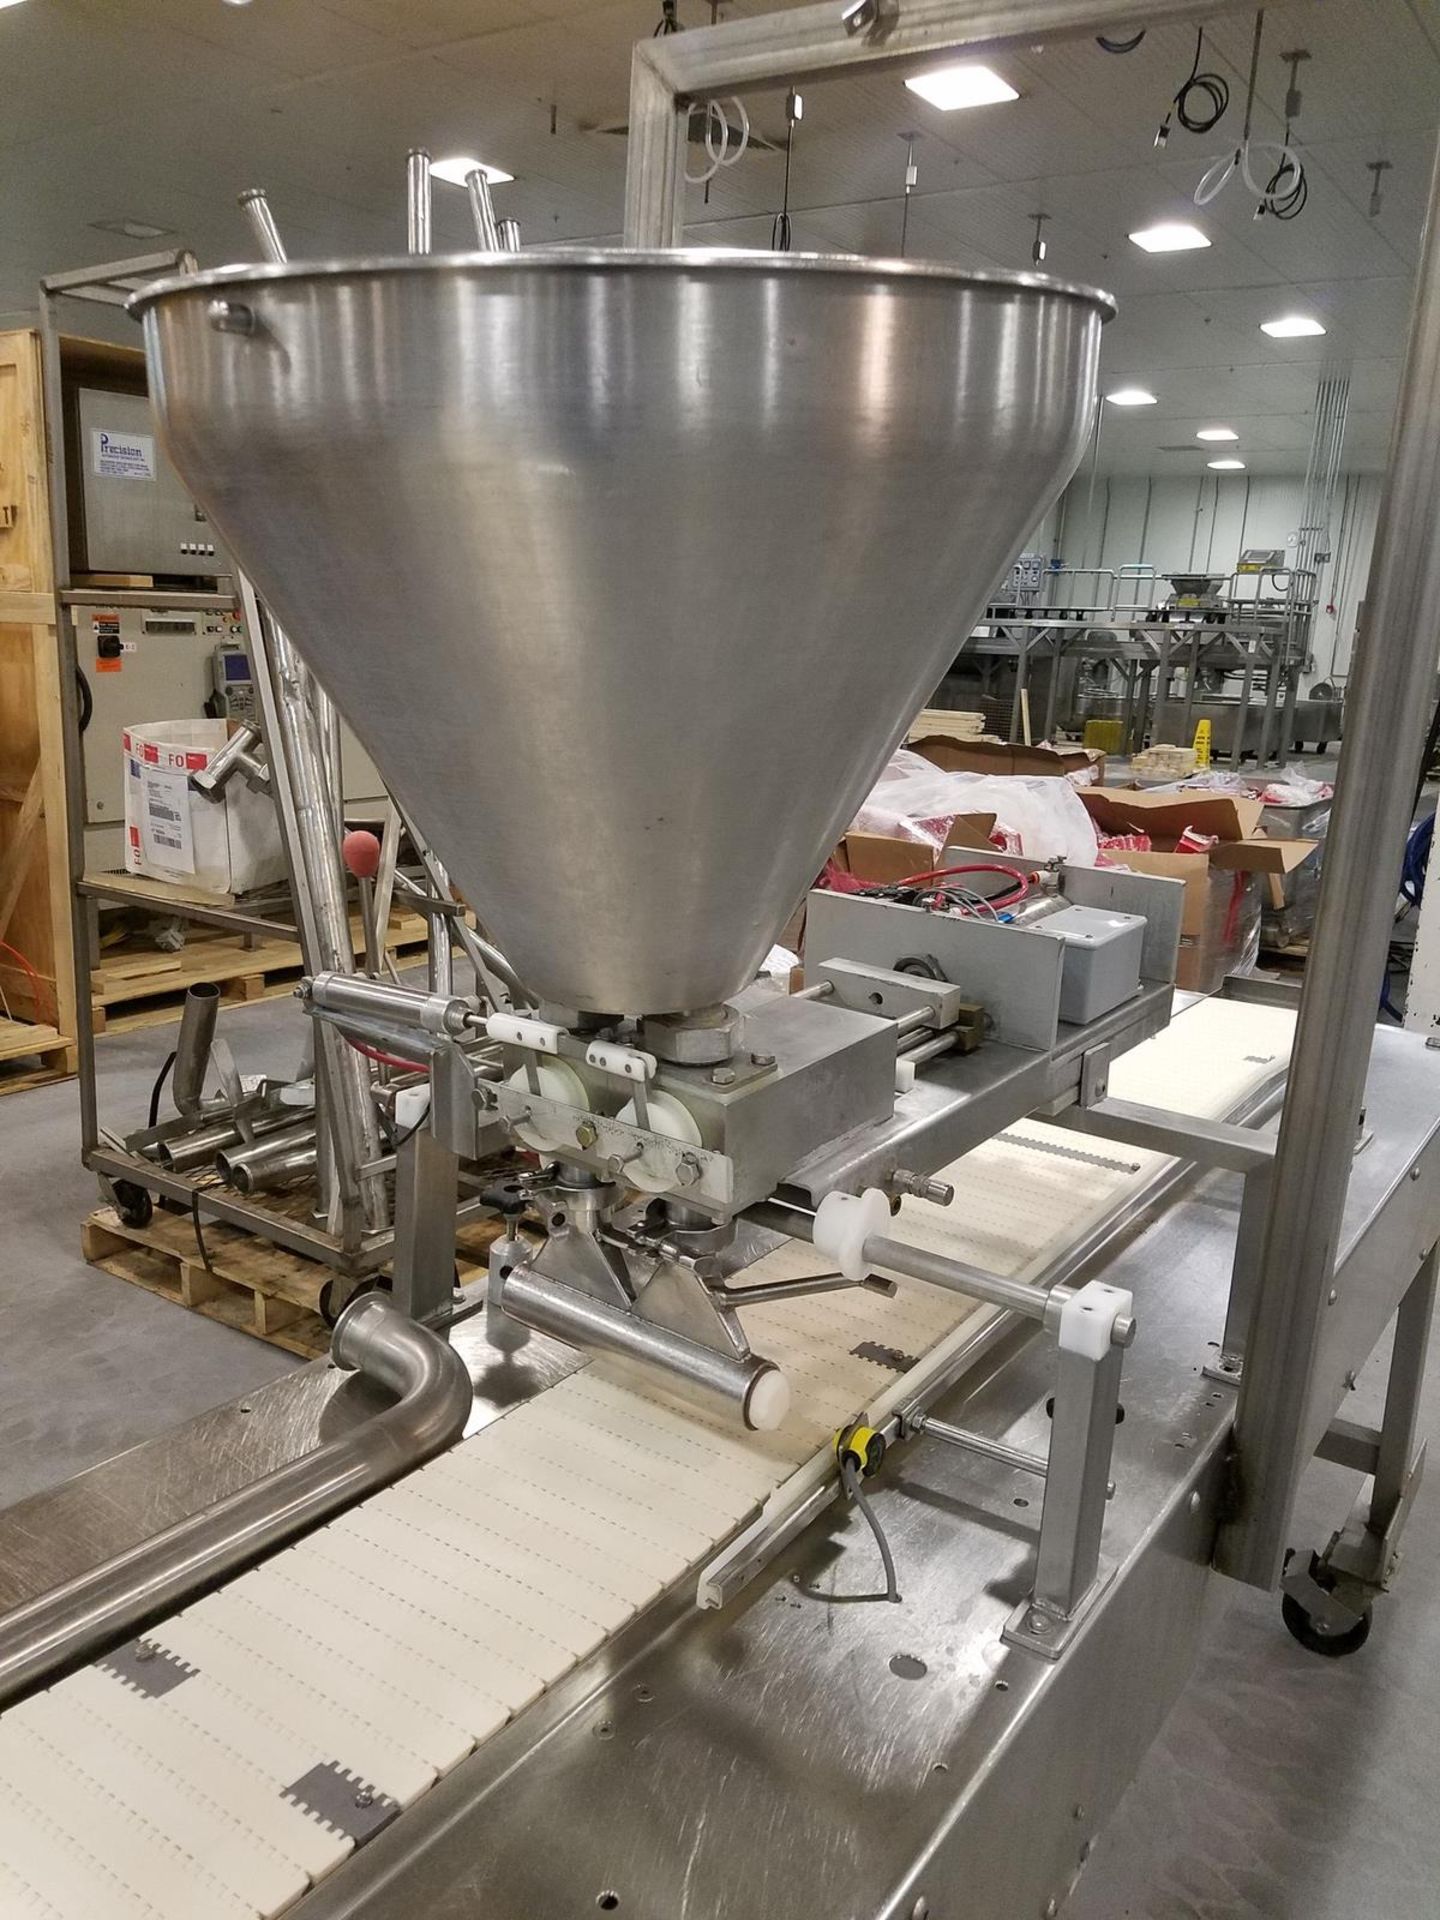 Unifiller Automatic Cake Frosting/Decorating Line, W/ (2) Dual Piston Hopper Fe | Rig Fee: $800 - Image 5 of 6